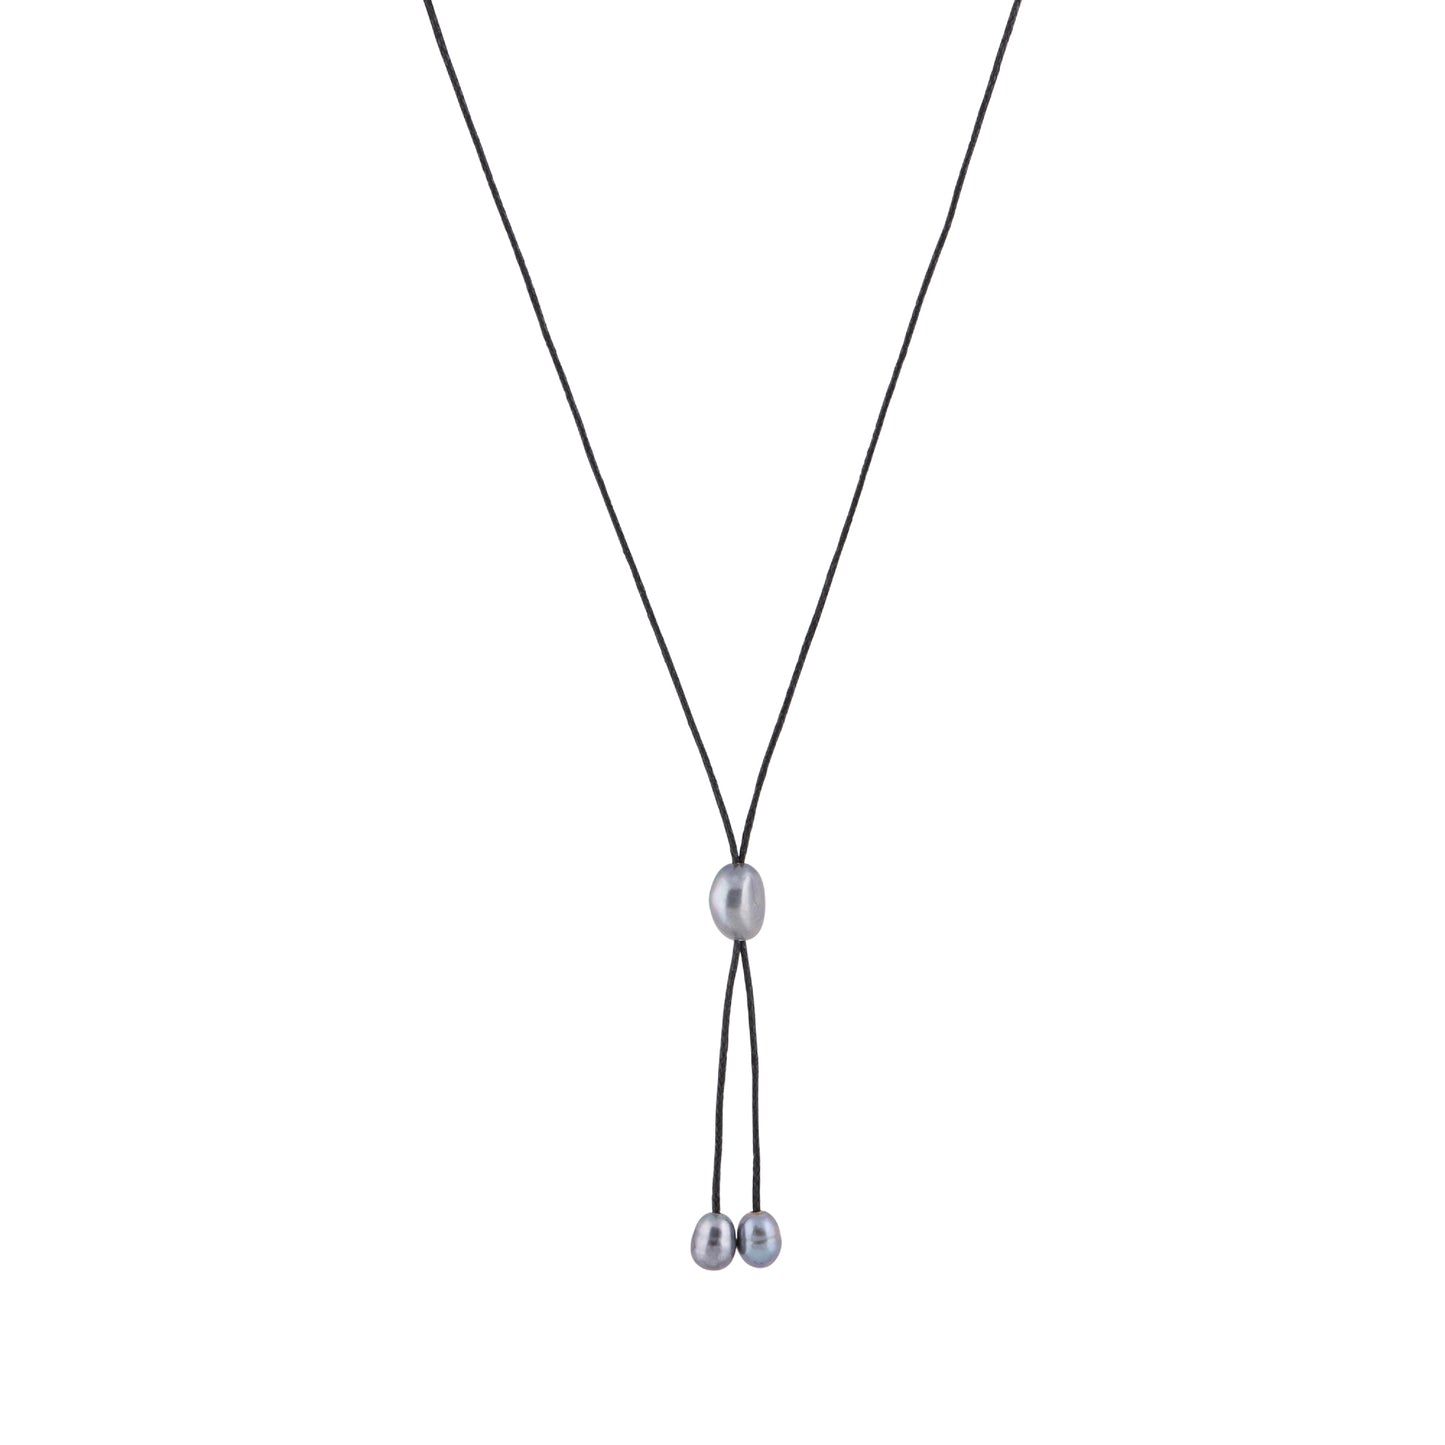 Lily - Freshwater pearl bolo tie necklace (Black strand, dark grey pearls)